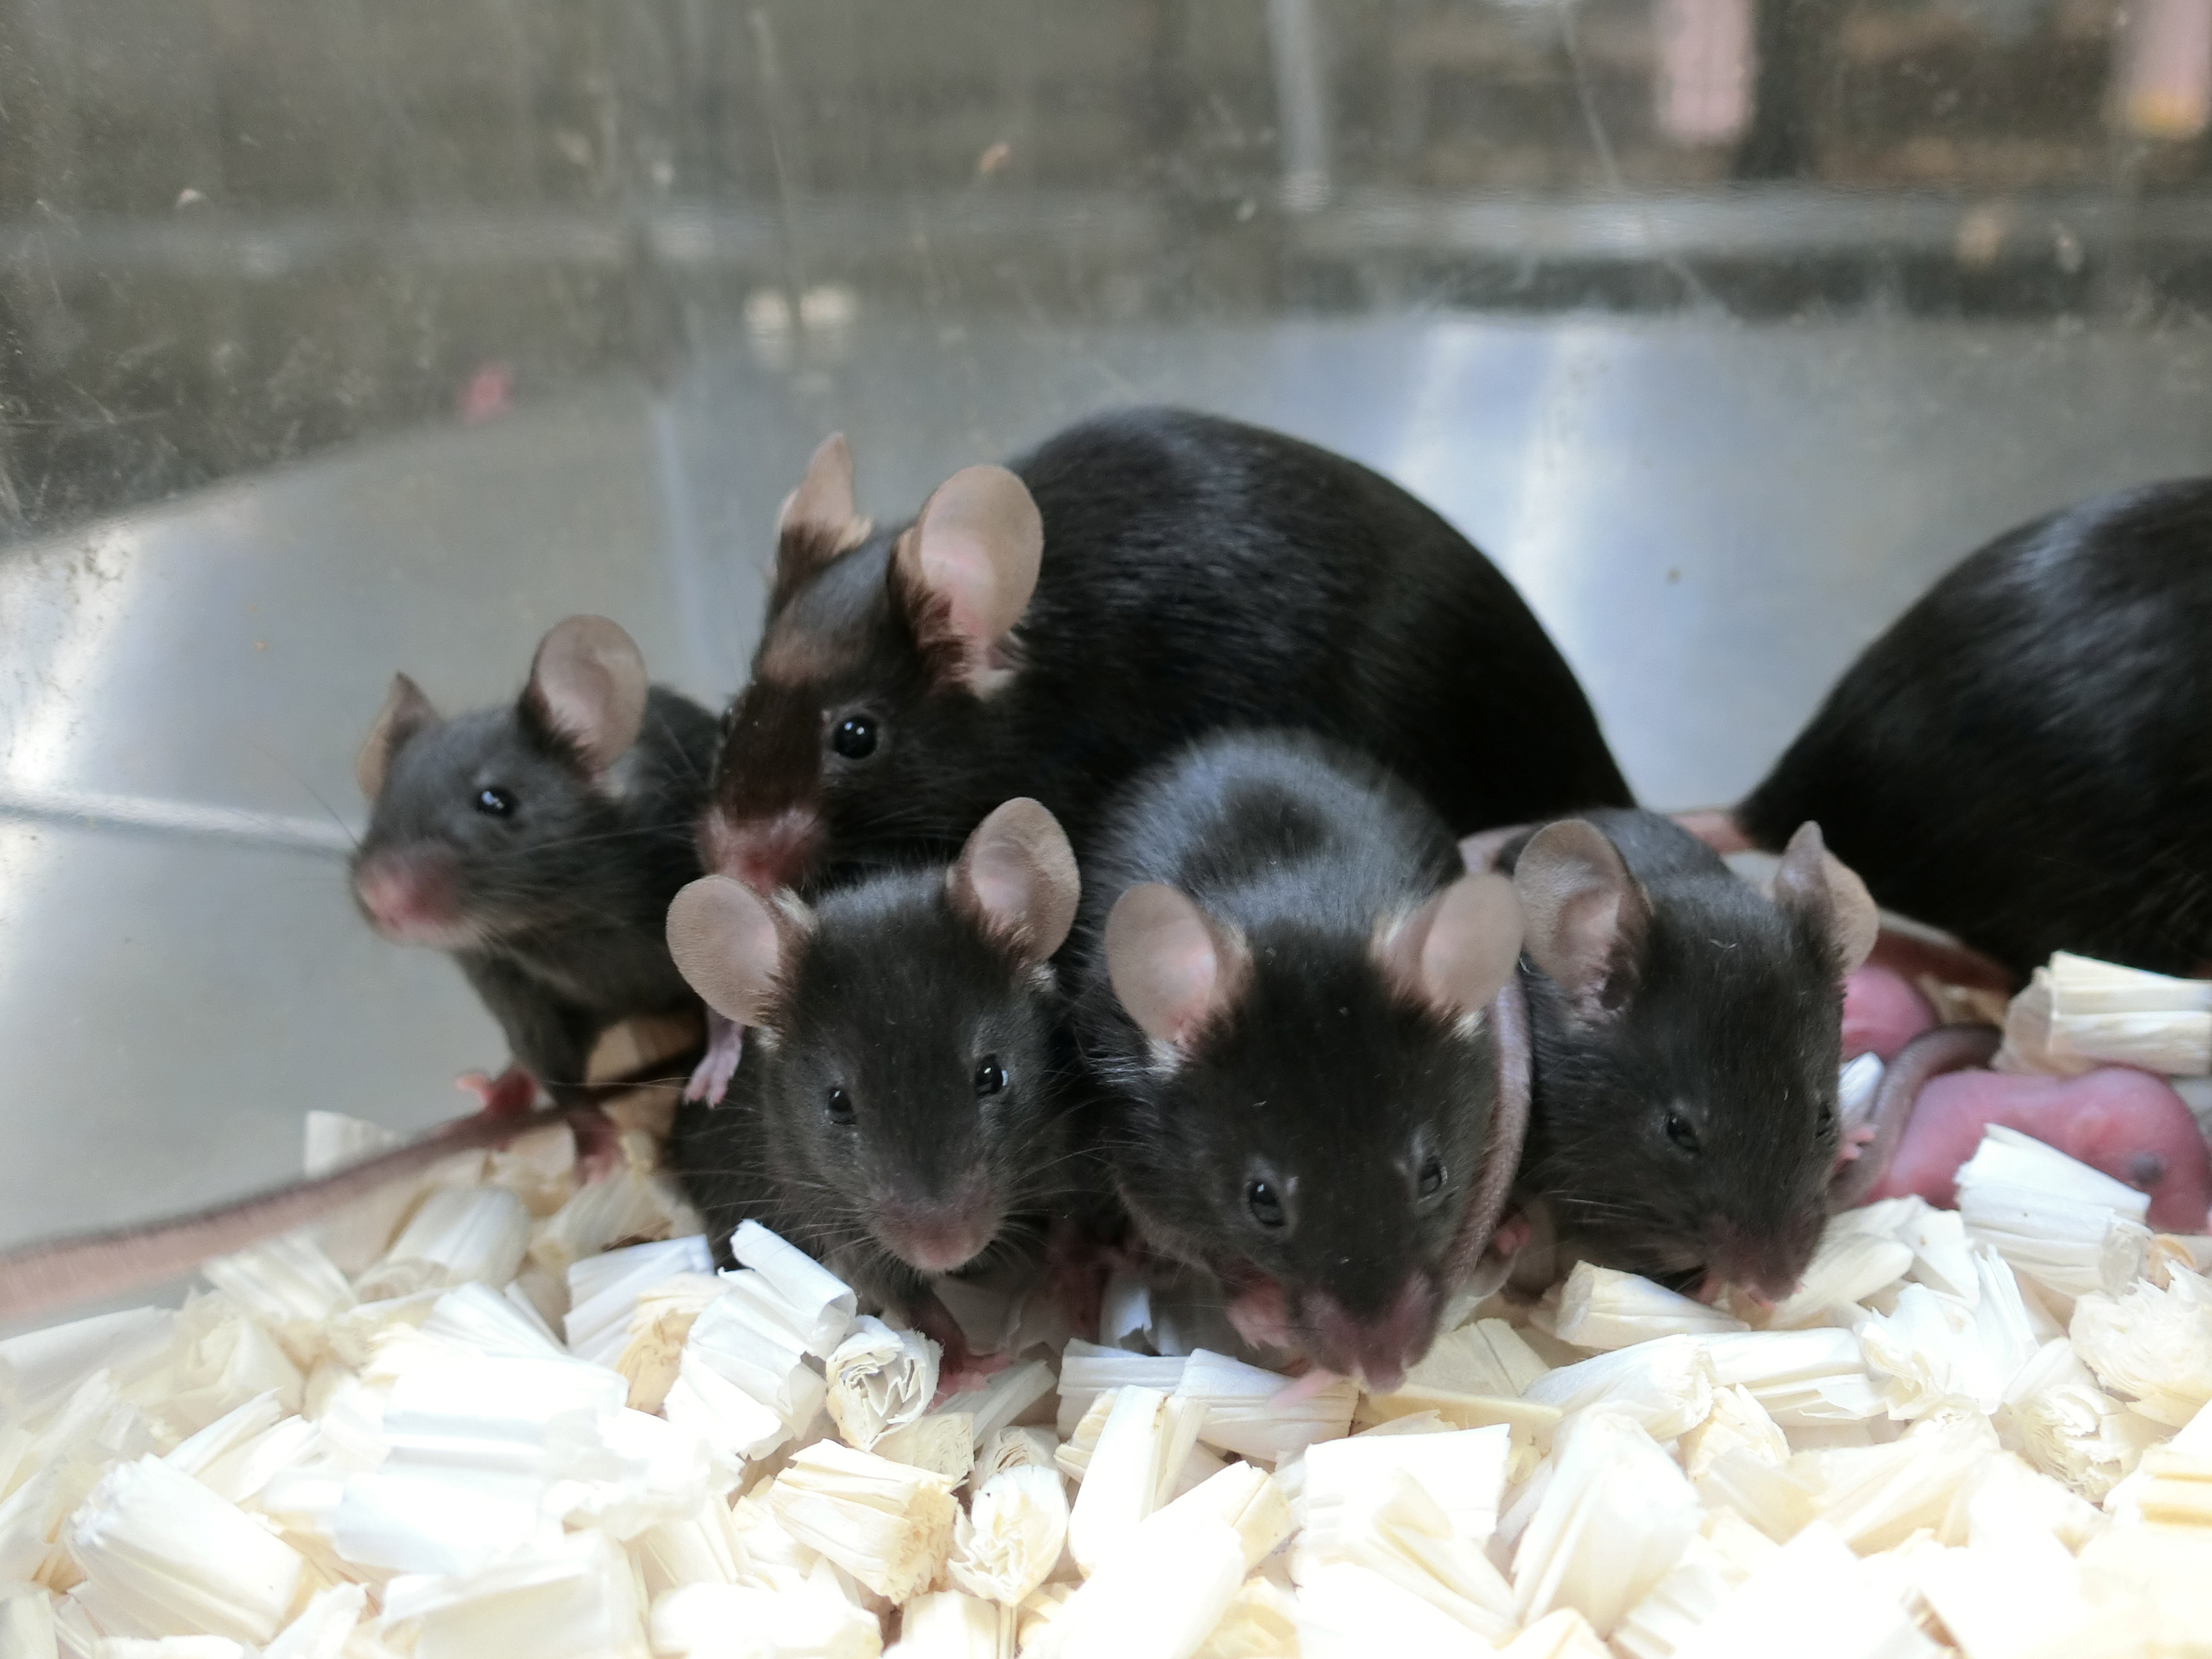 Healthy mice produced from sperm cells that were freeze-dried, stored in a sealed capsule and preserved on the orbiting International Space Station are seen in a laboratory in Japan in this undated handout image. Teruhiko Wakayama, University of Yamanashi/Handout via REUTERS